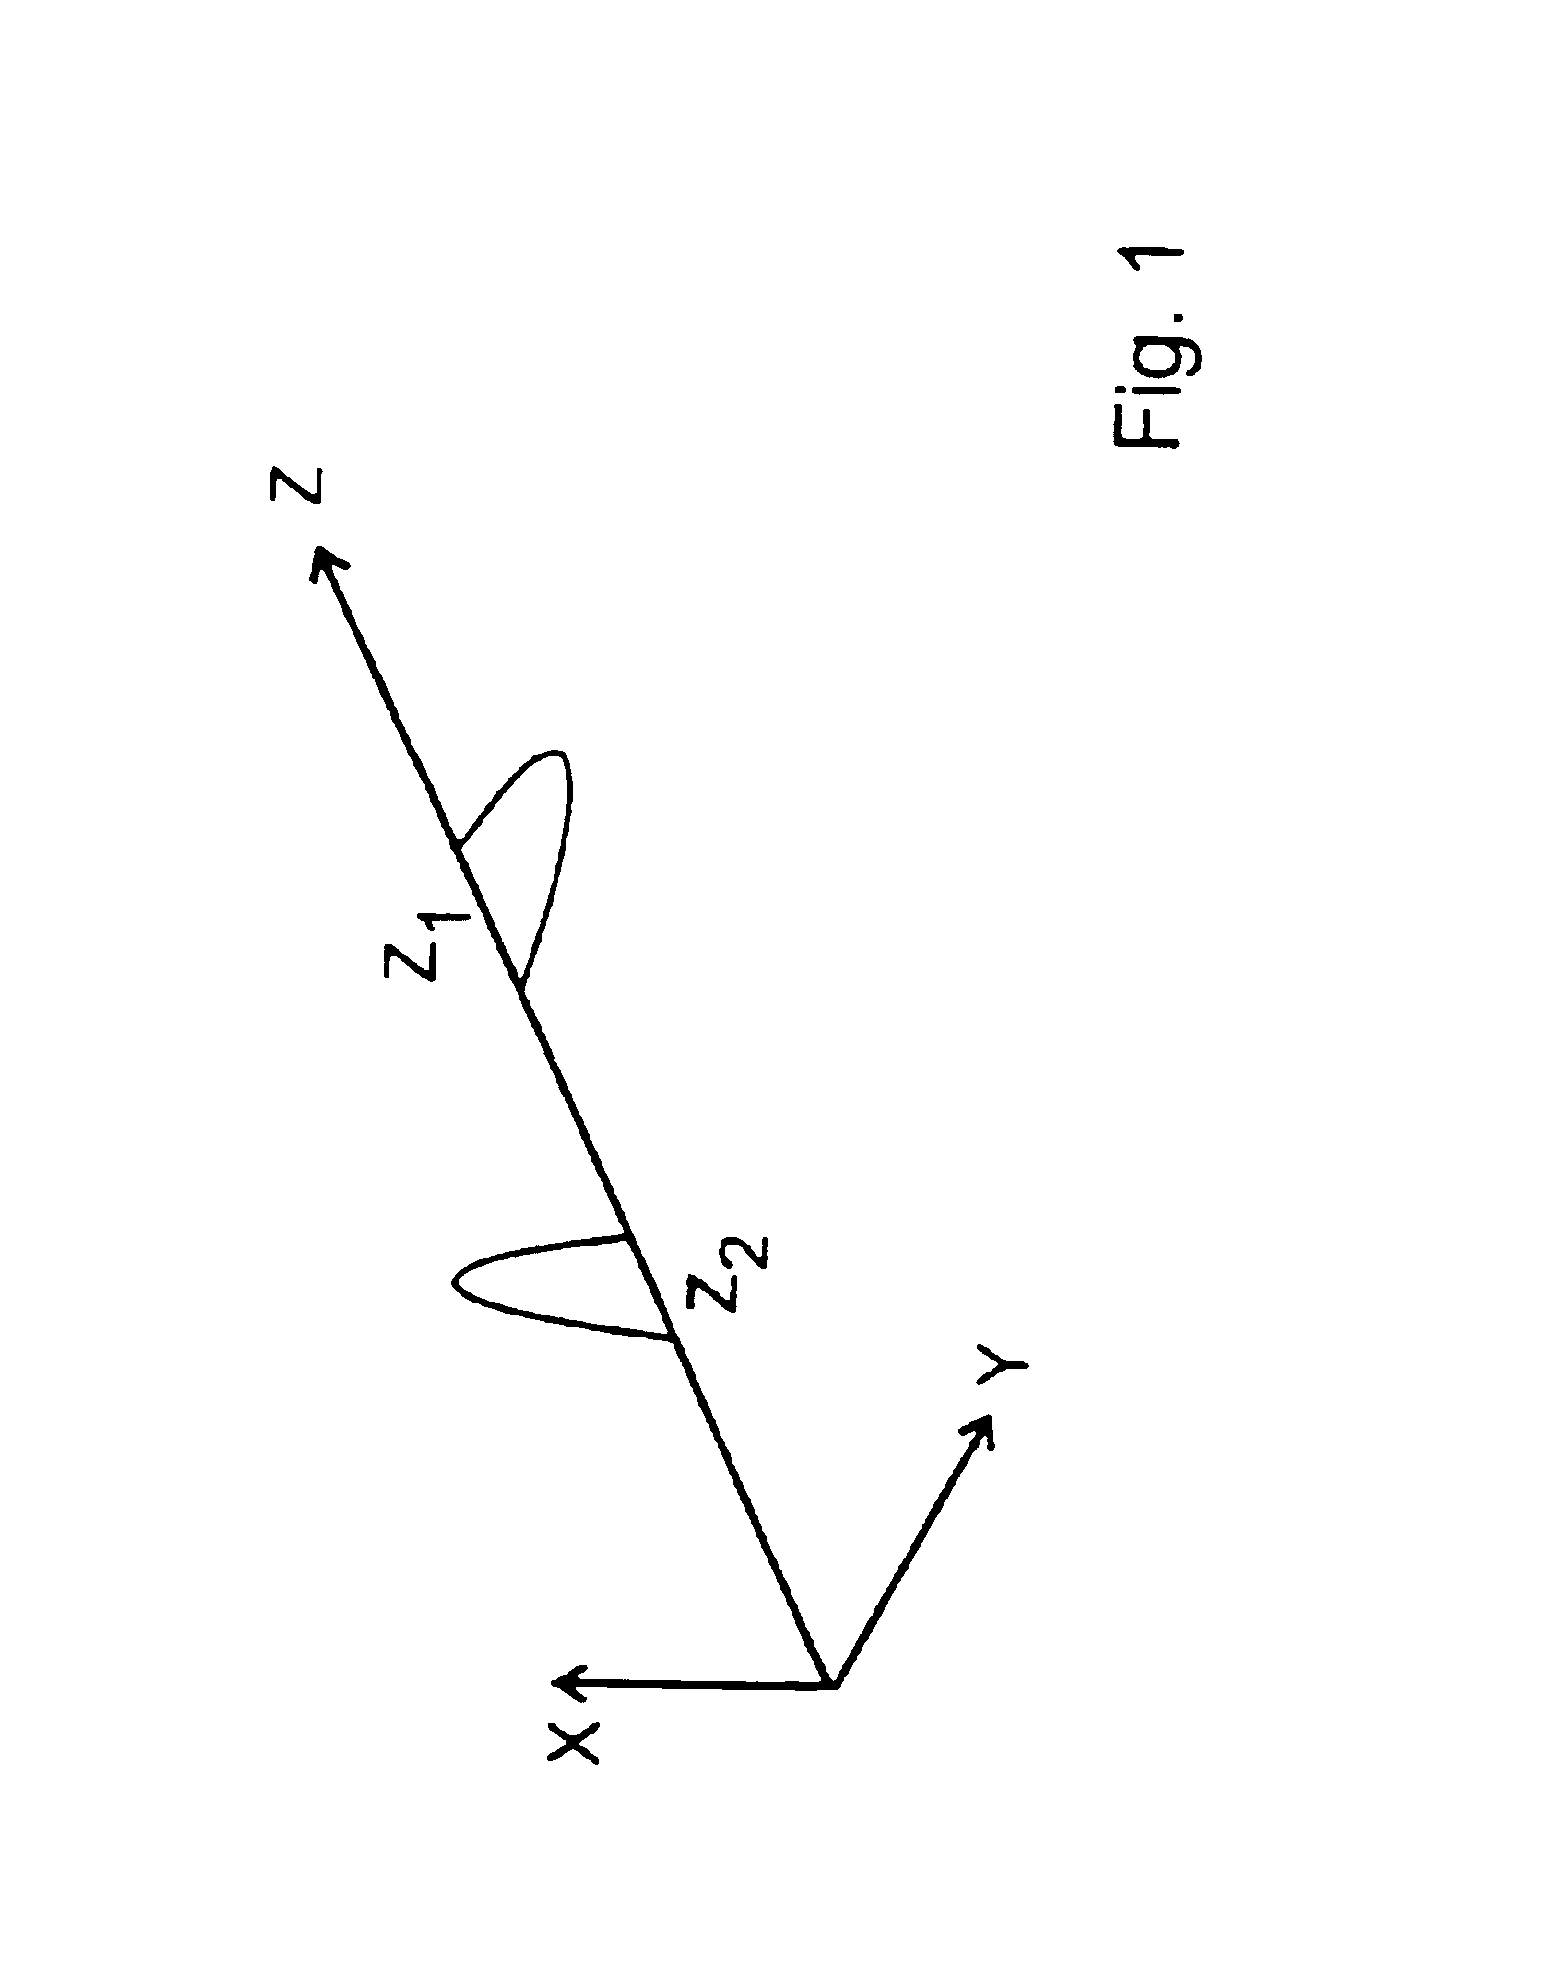 Method for changing the polarization of at least one of the photons emitted from a photon-pair source into various partial paths of rays, and method for optionally generating individual photons or photon pairs in an optical channel